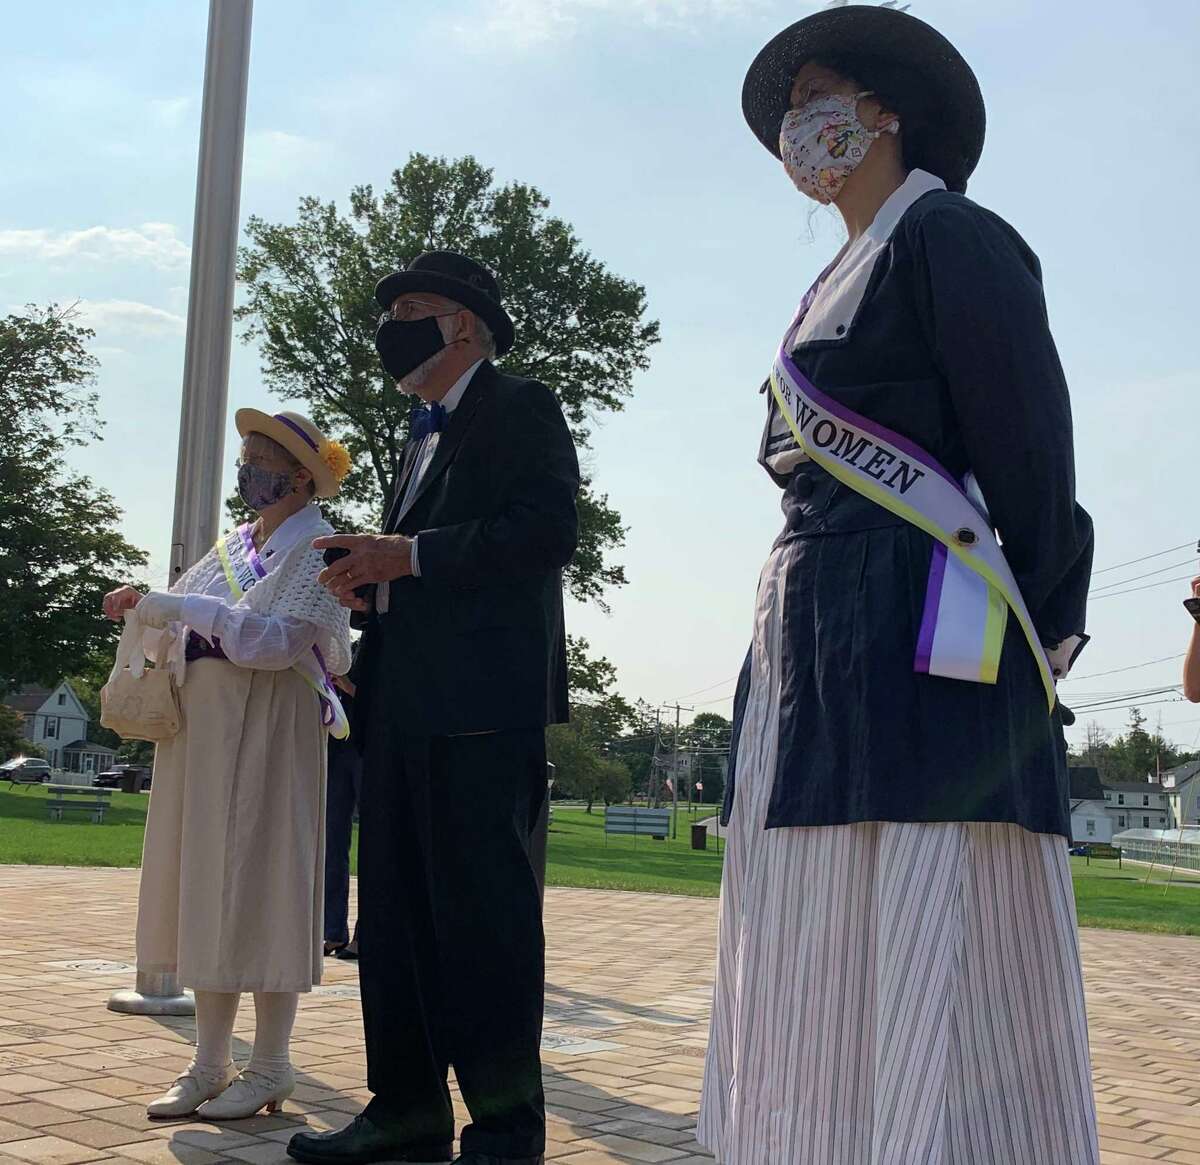 Several state and local officials gathered in Cromwell on Tuesday morning to unveil a memorial established for historical Cromwell figure Emily Pierson. Pierson was a pivotal figure in the women's suffrage movement.